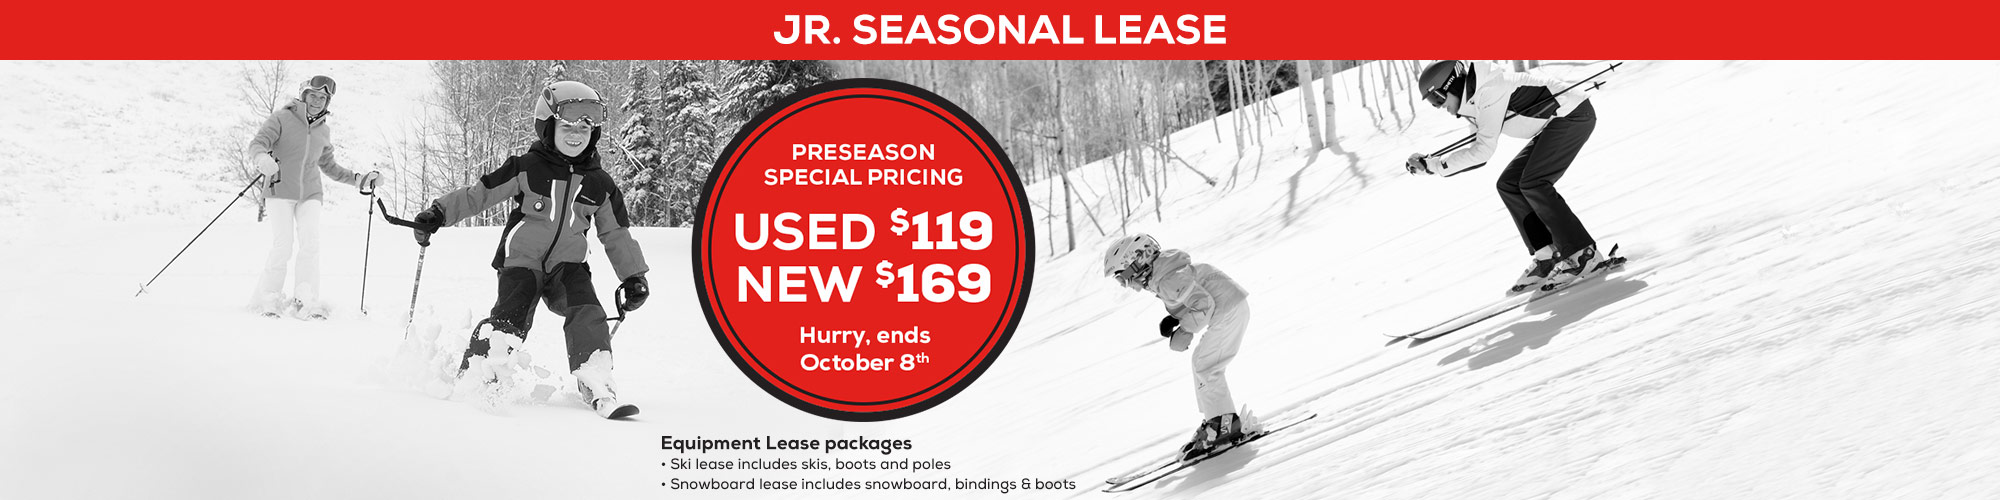 Ski Season Approaching Fast. Get The Kids Ready with out Junior Season Lease.